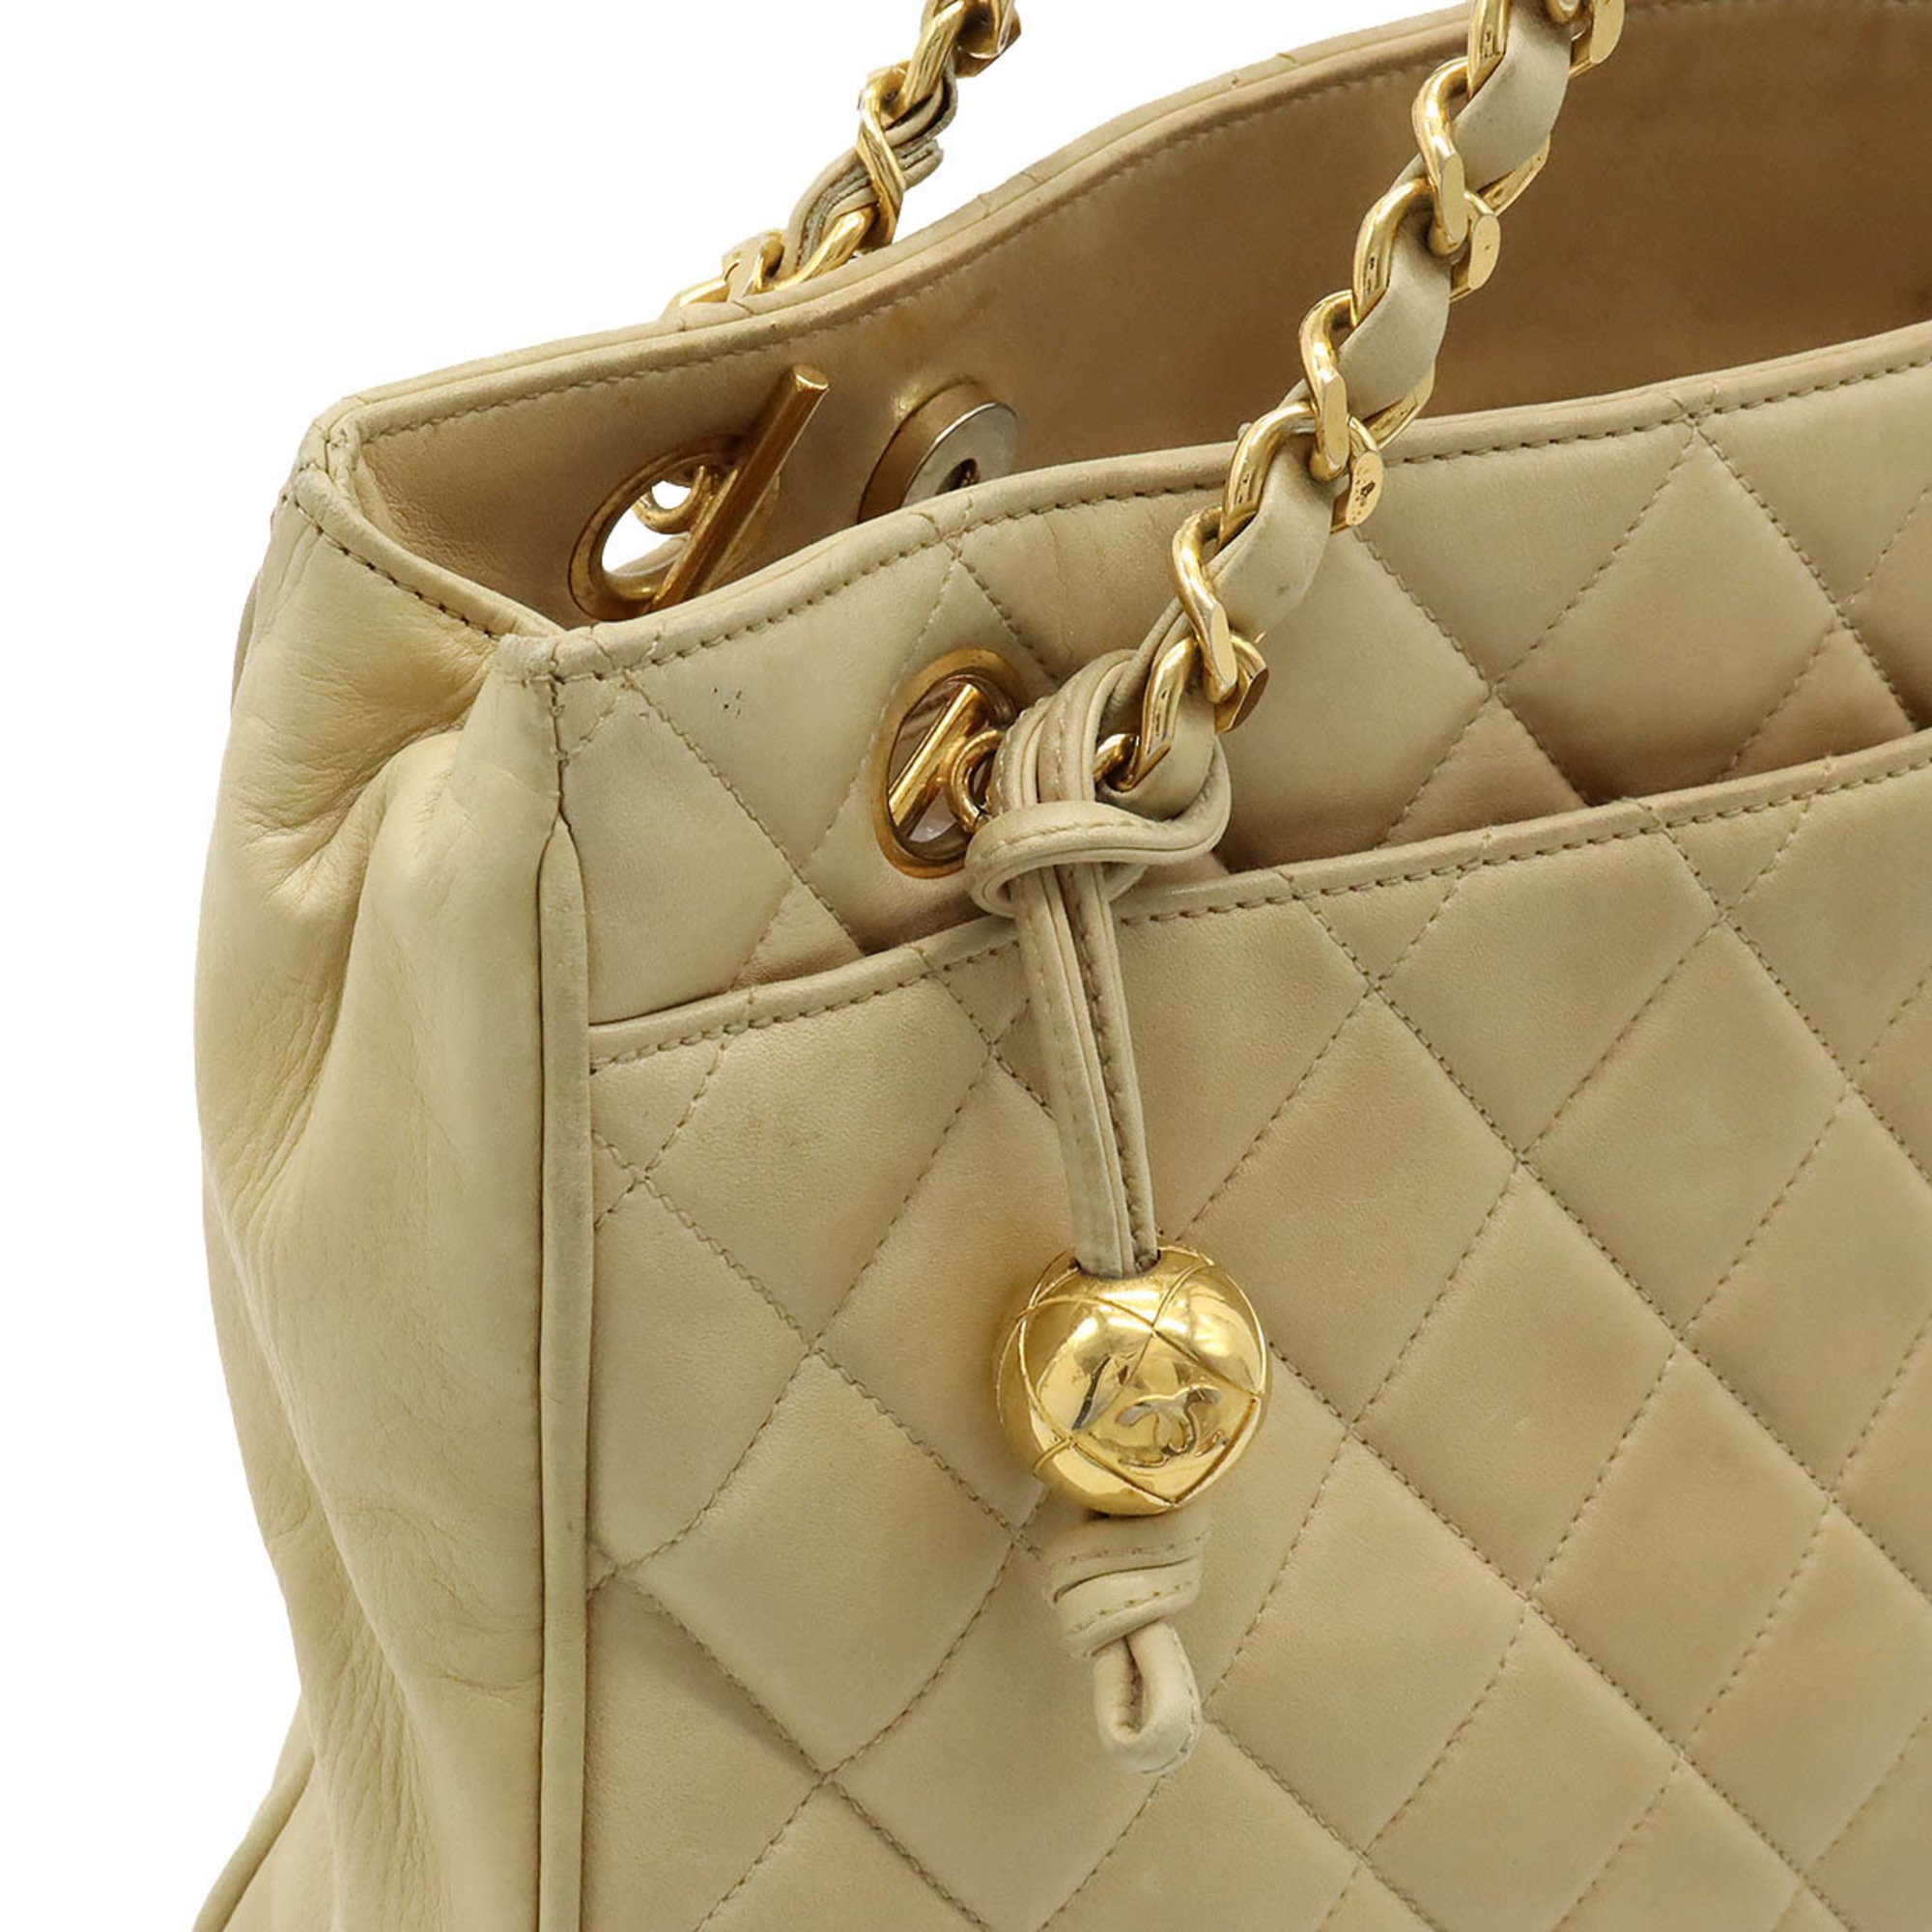 CHANEL Chanel Matelasse Coco Ball Chain Shoulder Bag Tote Leather Beige